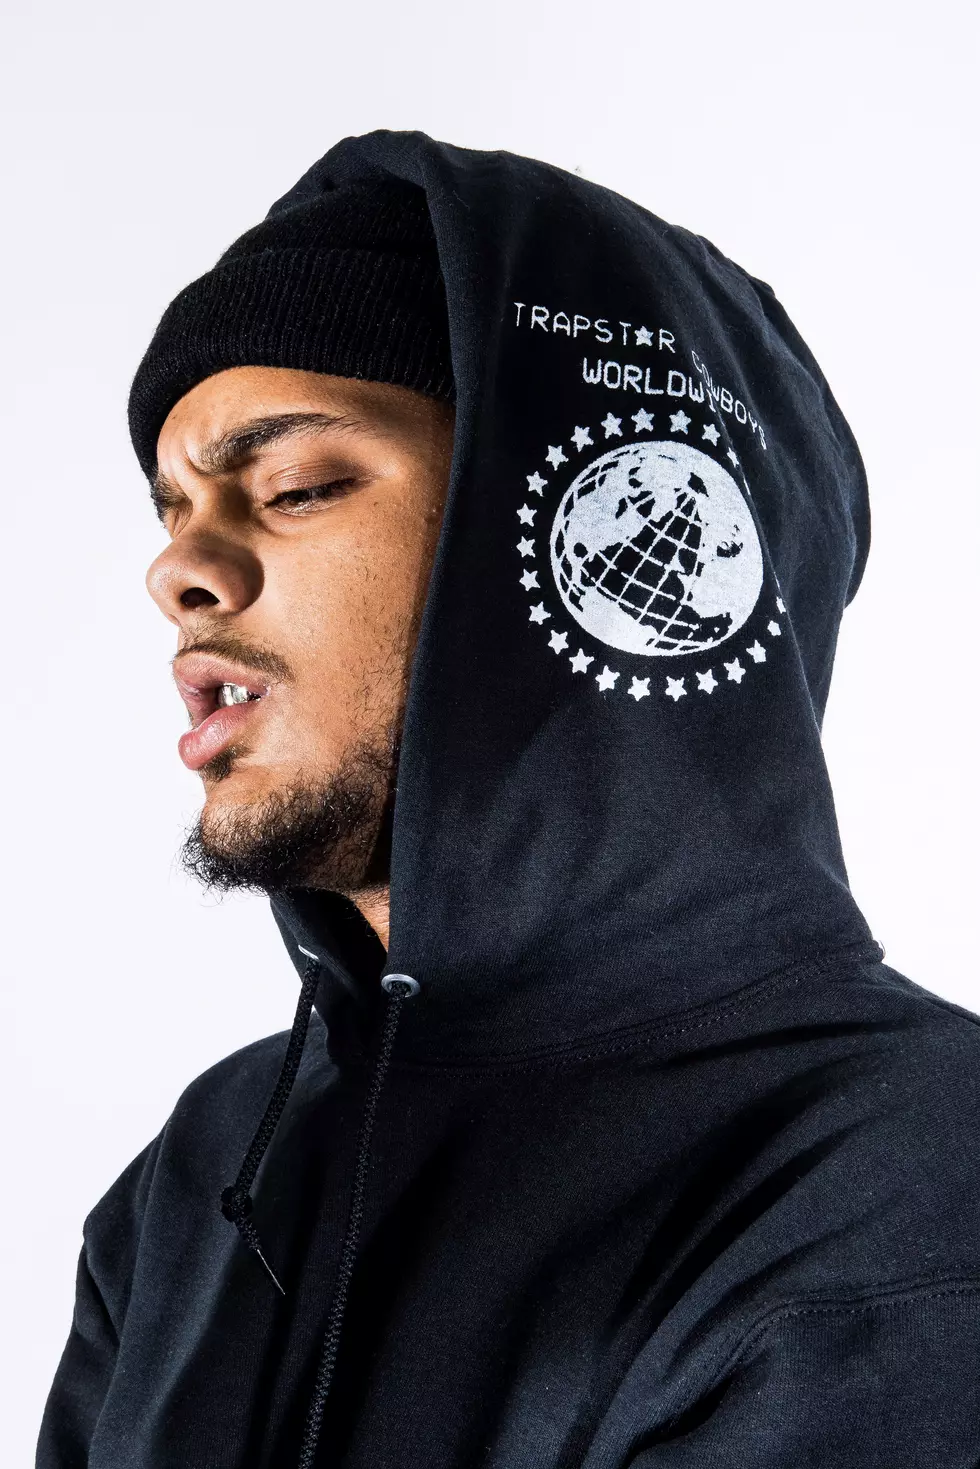 Smokepurpp Signs to Todd Moscowitz’s New Label Alamo Records